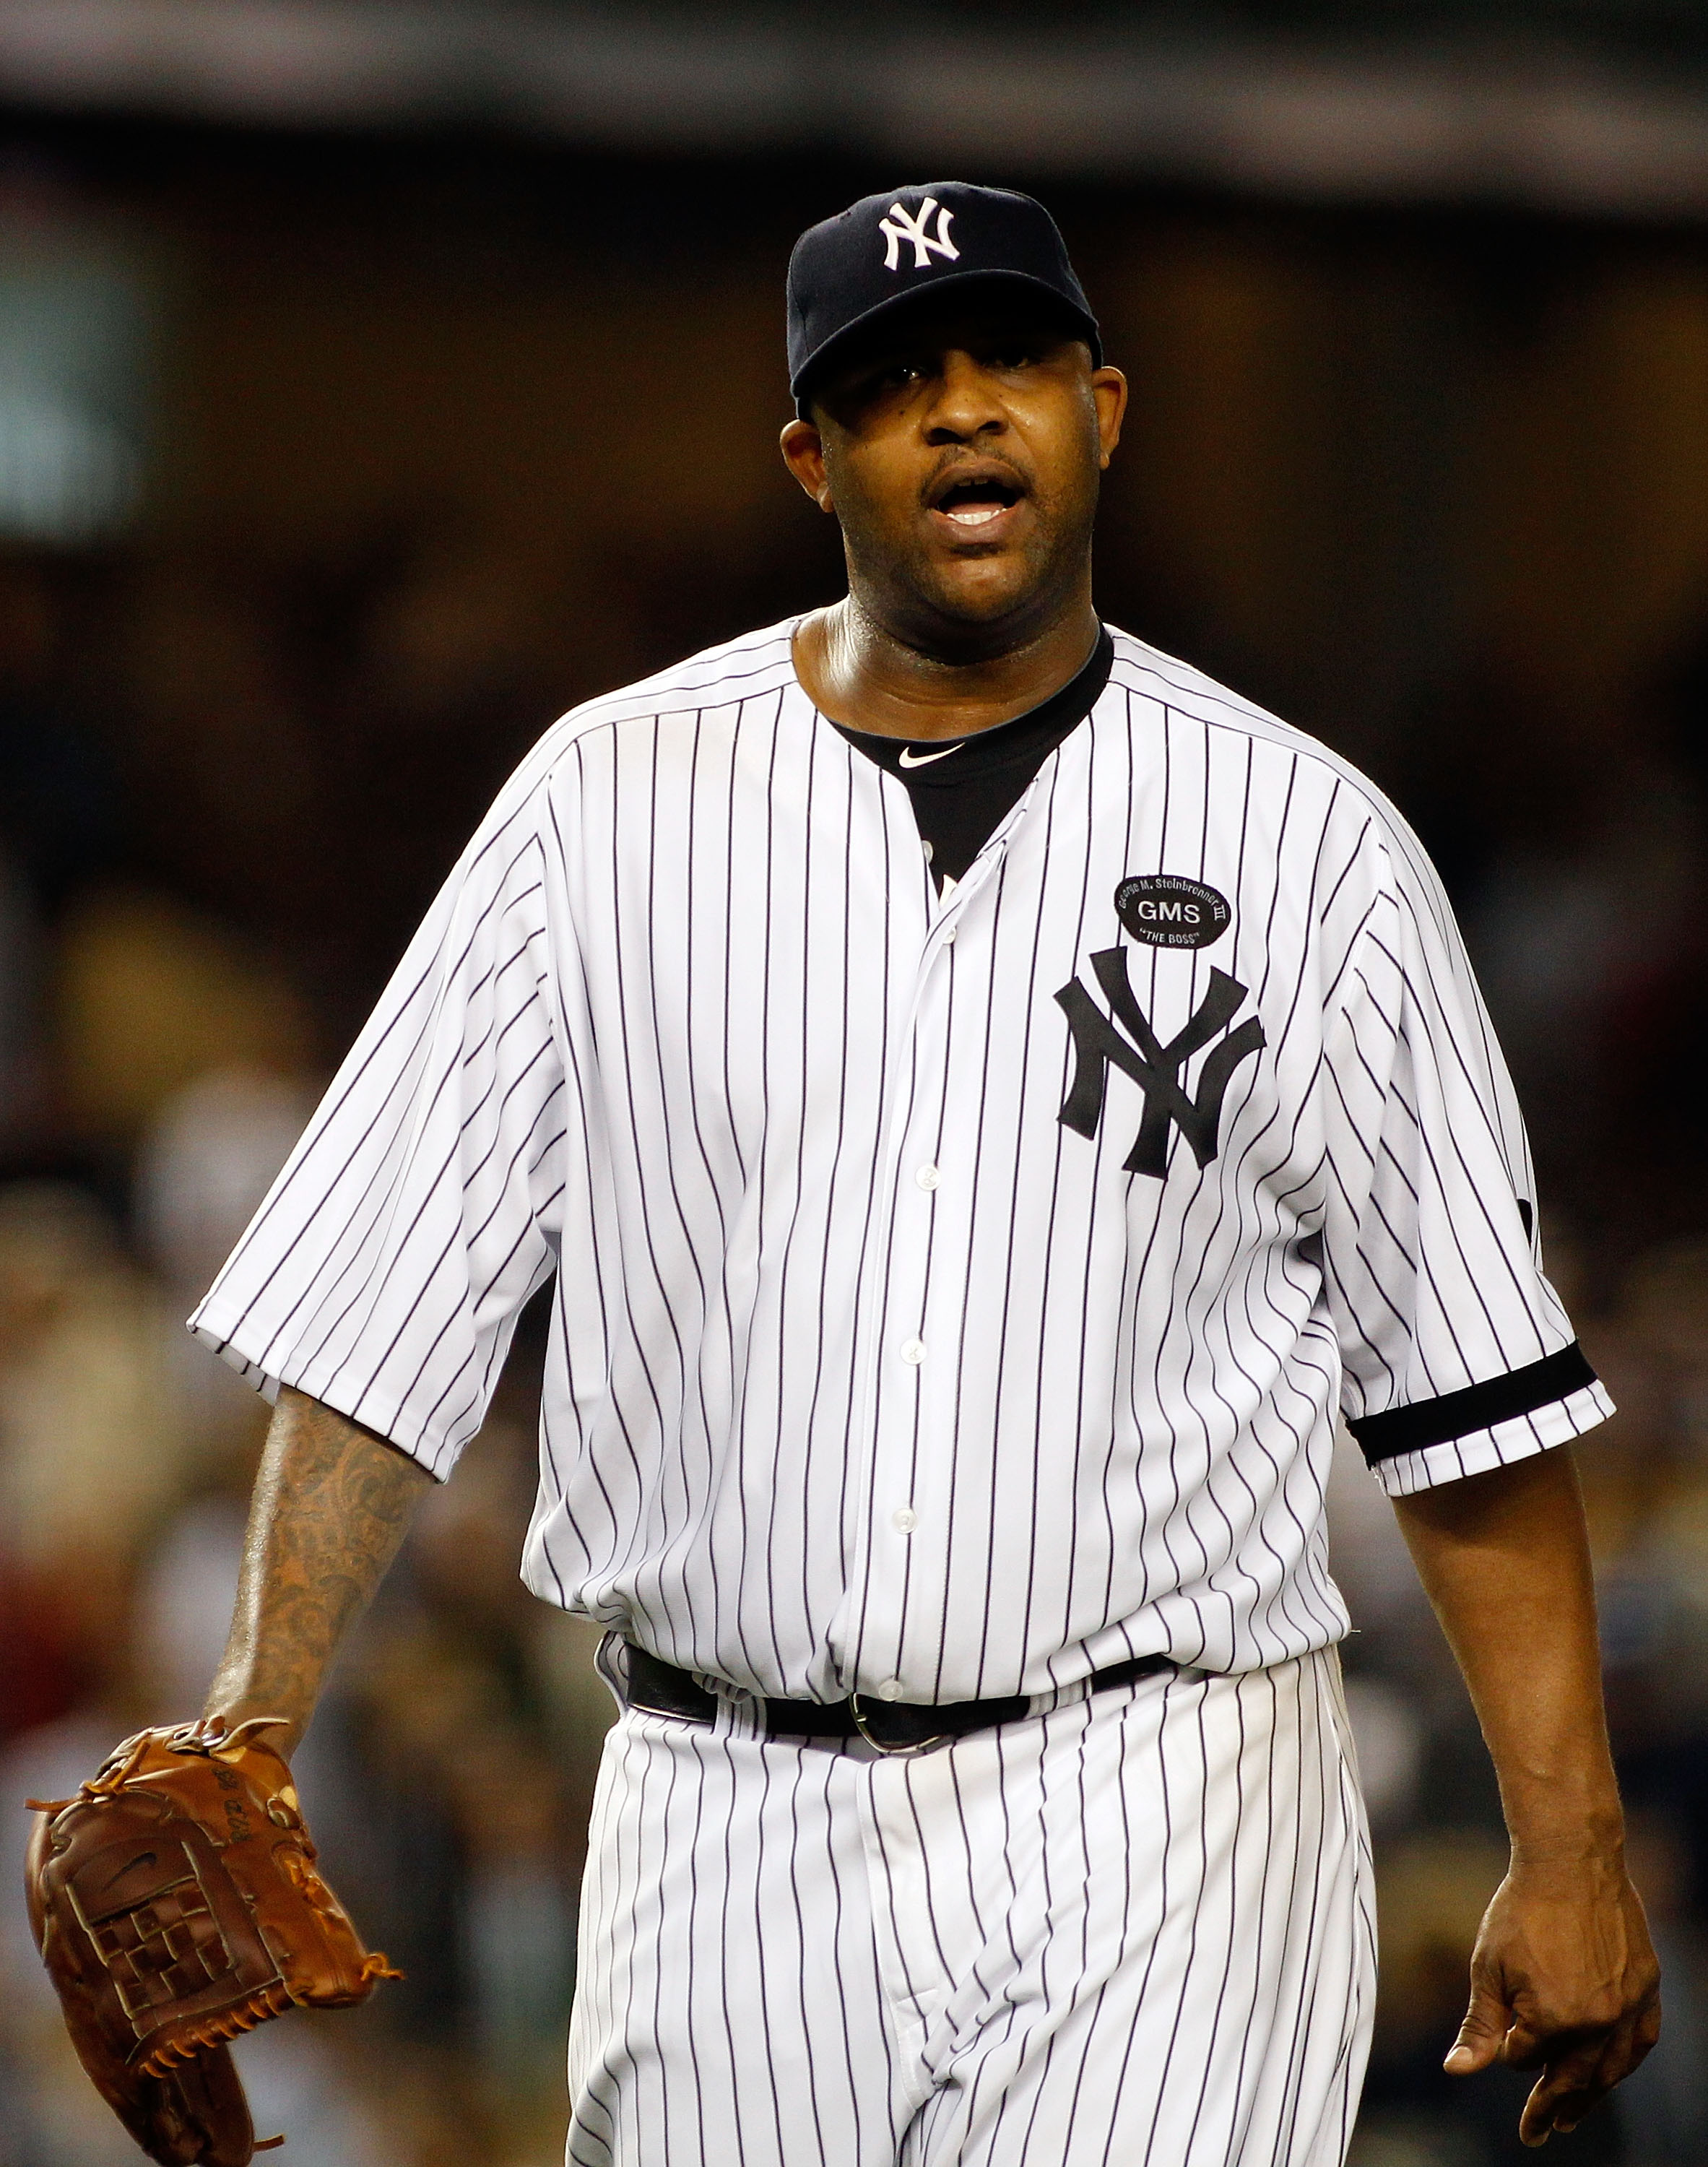 NEW YORK - SEPTEMBER 23:  CC Sabathia #52 of the New York Yankees looks on against the Tampa Bay Rays on September 23, 2010 at Yankee Stadium in the Bronx borough of New York City.  (Photo by Mike Stobe/Getty Images)